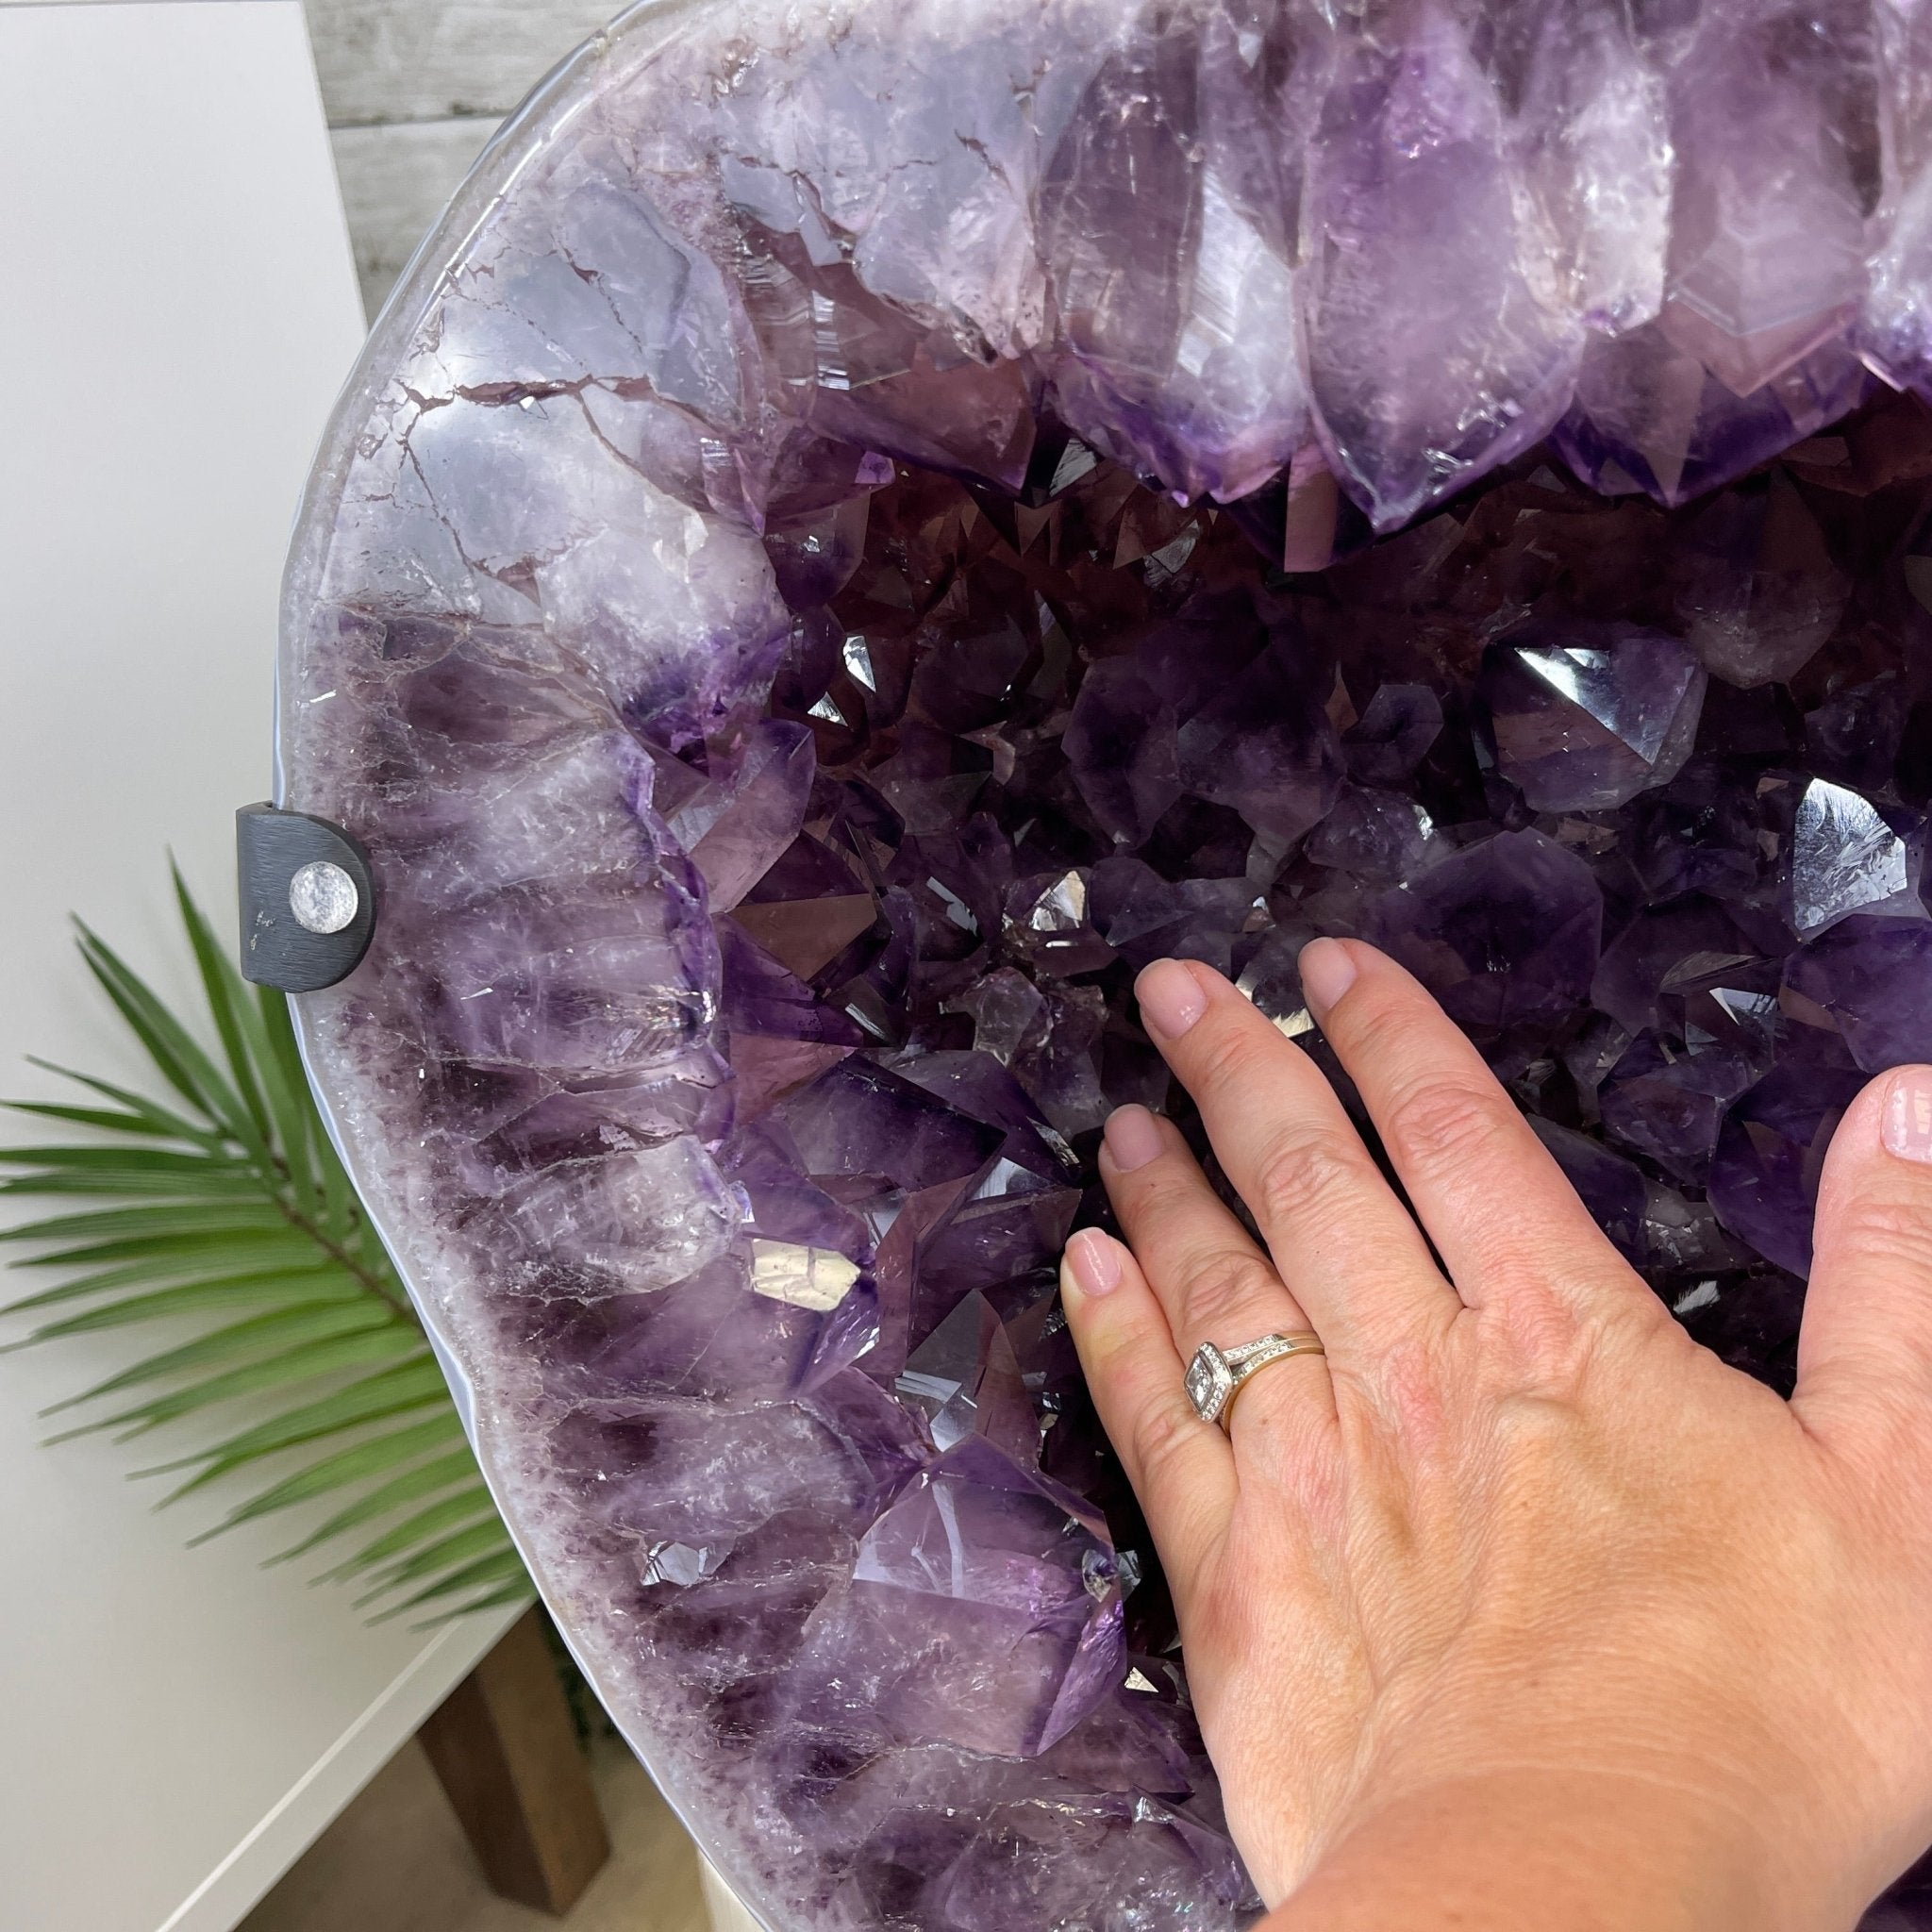 Super Quality Polished Amethyst "Jewelry Box", Clam Shell style Lid, 189.6 lbs & 25.5" tall, Model #5656-0008 by Brazil Gems - Brazil GemsBrazil GemsSuper Quality Polished Amethyst "Jewelry Box", Clam Shell style Lid, 189.6 lbs & 25.5" tall, Model #5656-0008 by Brazil GemsGeode Jewelry Boxes5656-0008